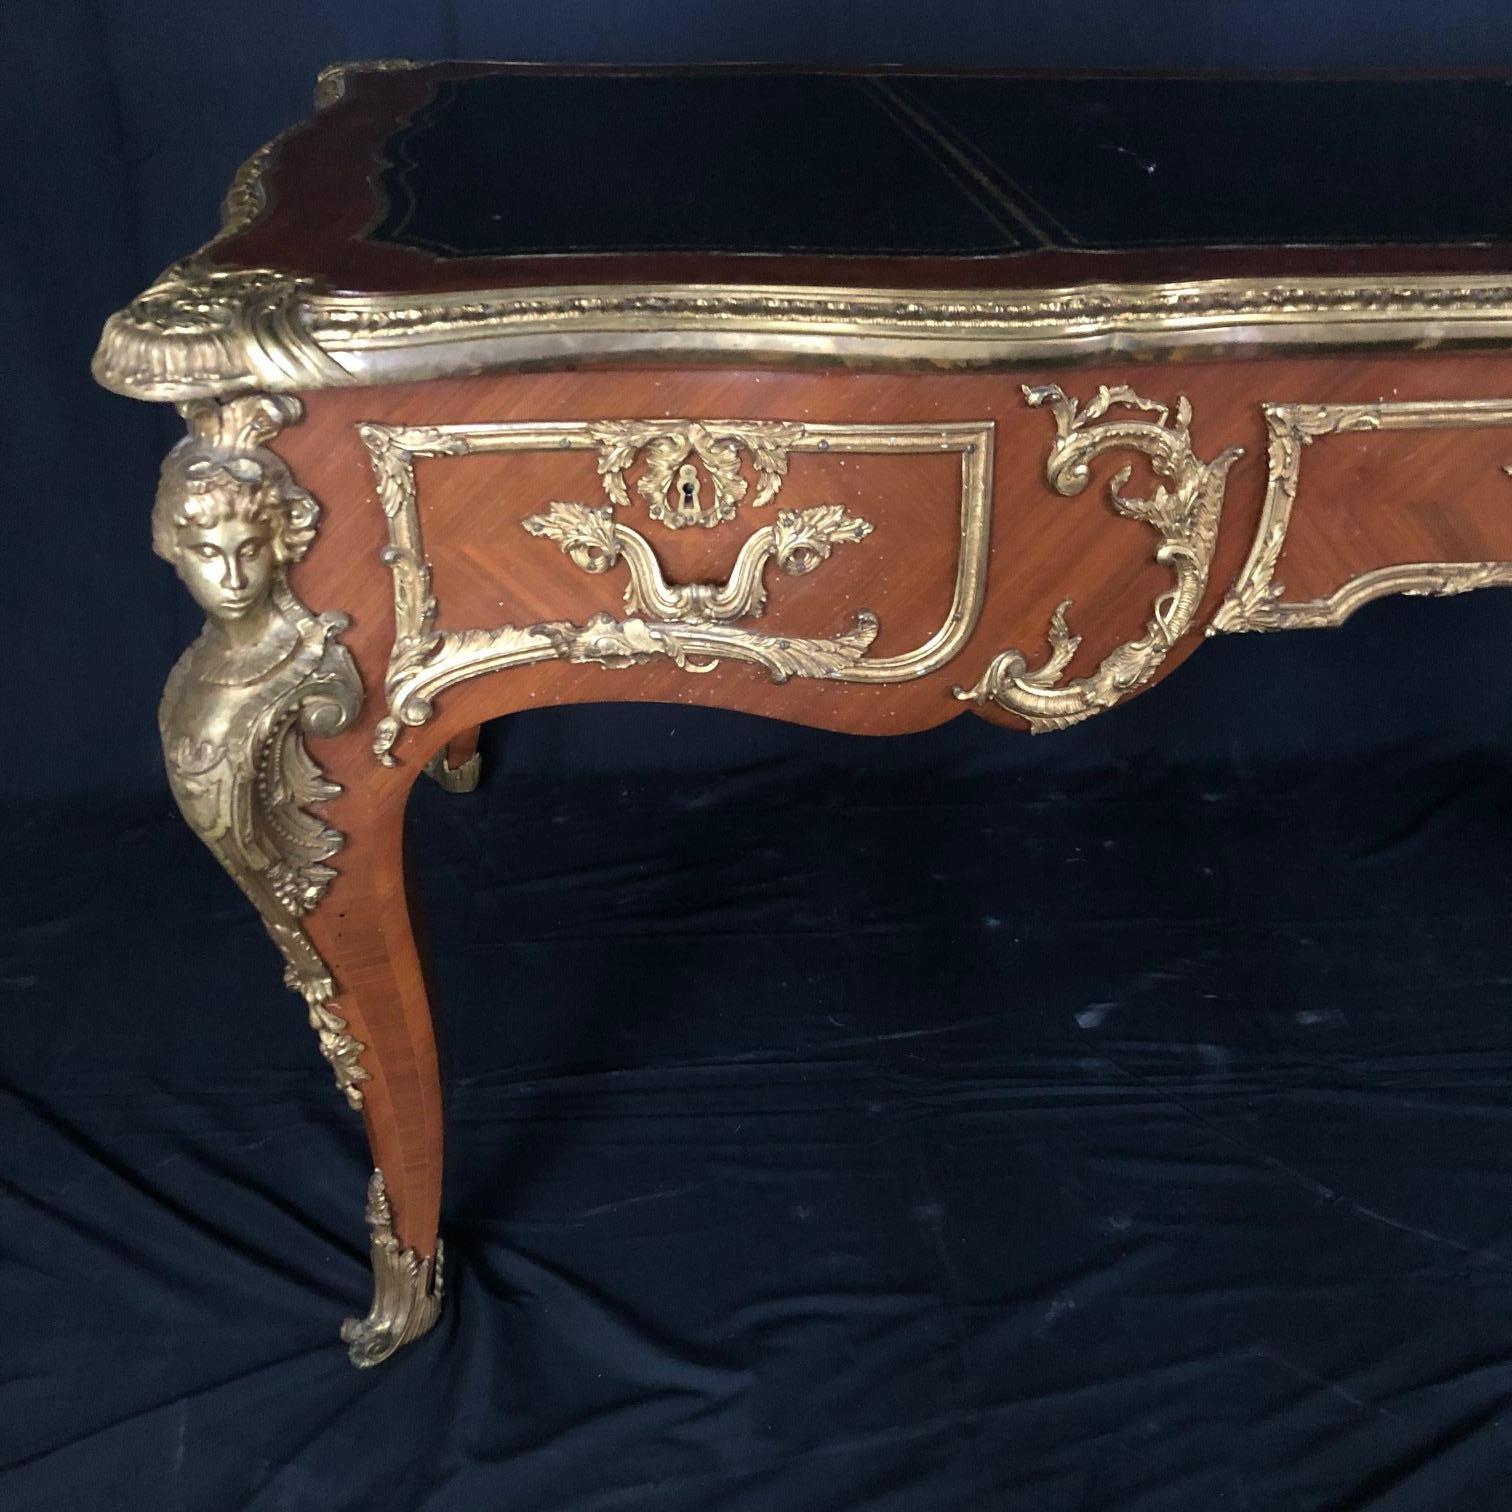 Marquetry Ornate French Louis XV Style Two Sided Walnut and Ormolu Bureau Plat Desk